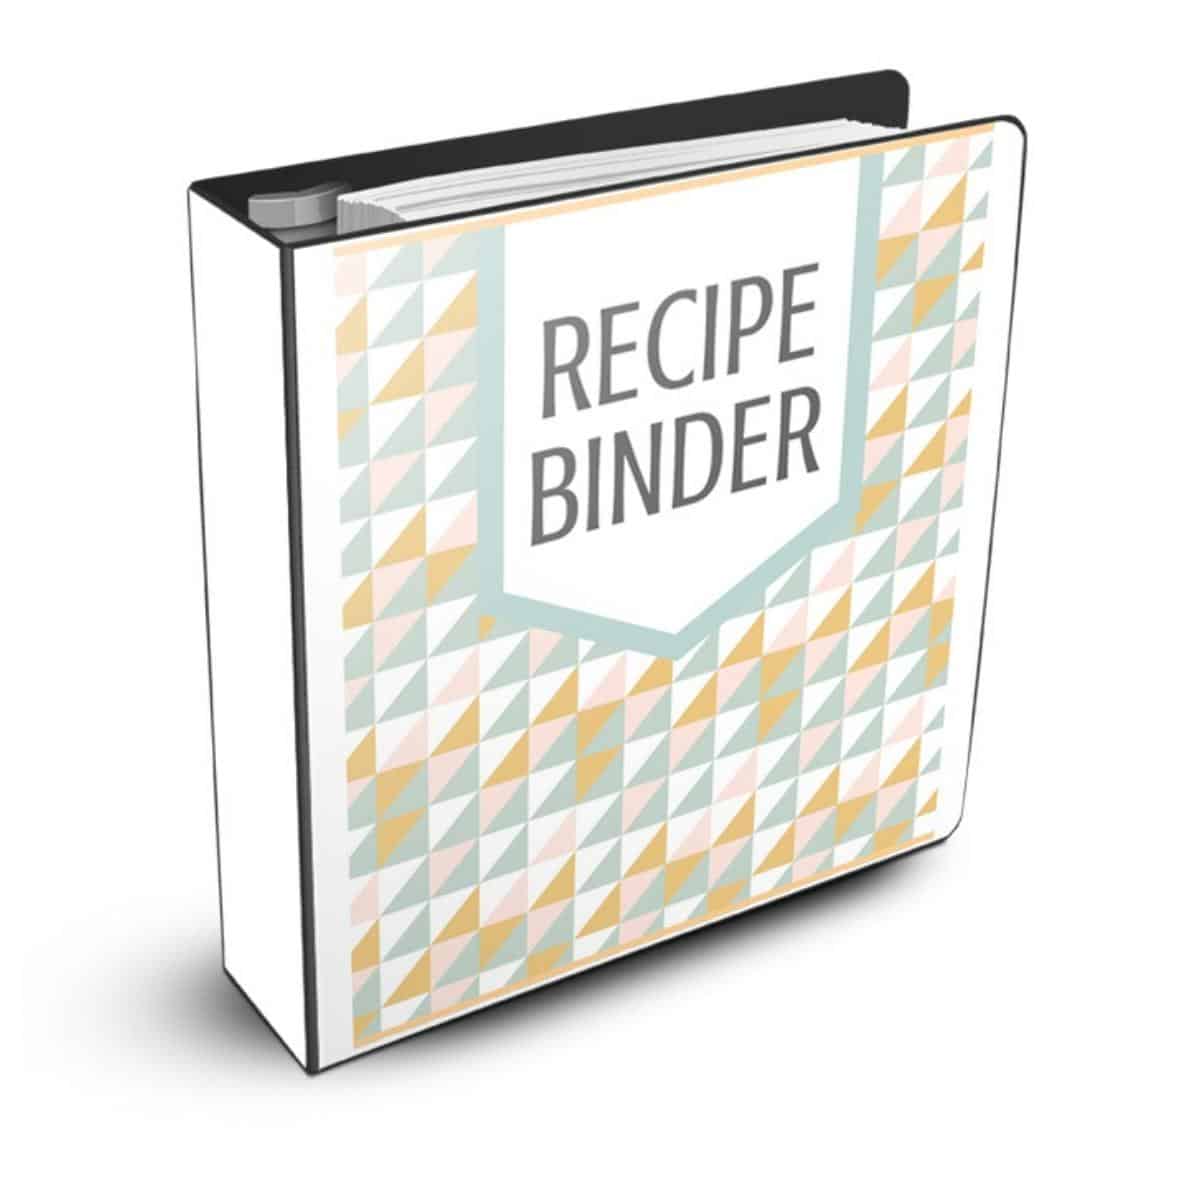 Blank Recipe Card Divider Templates - Free Printables Online